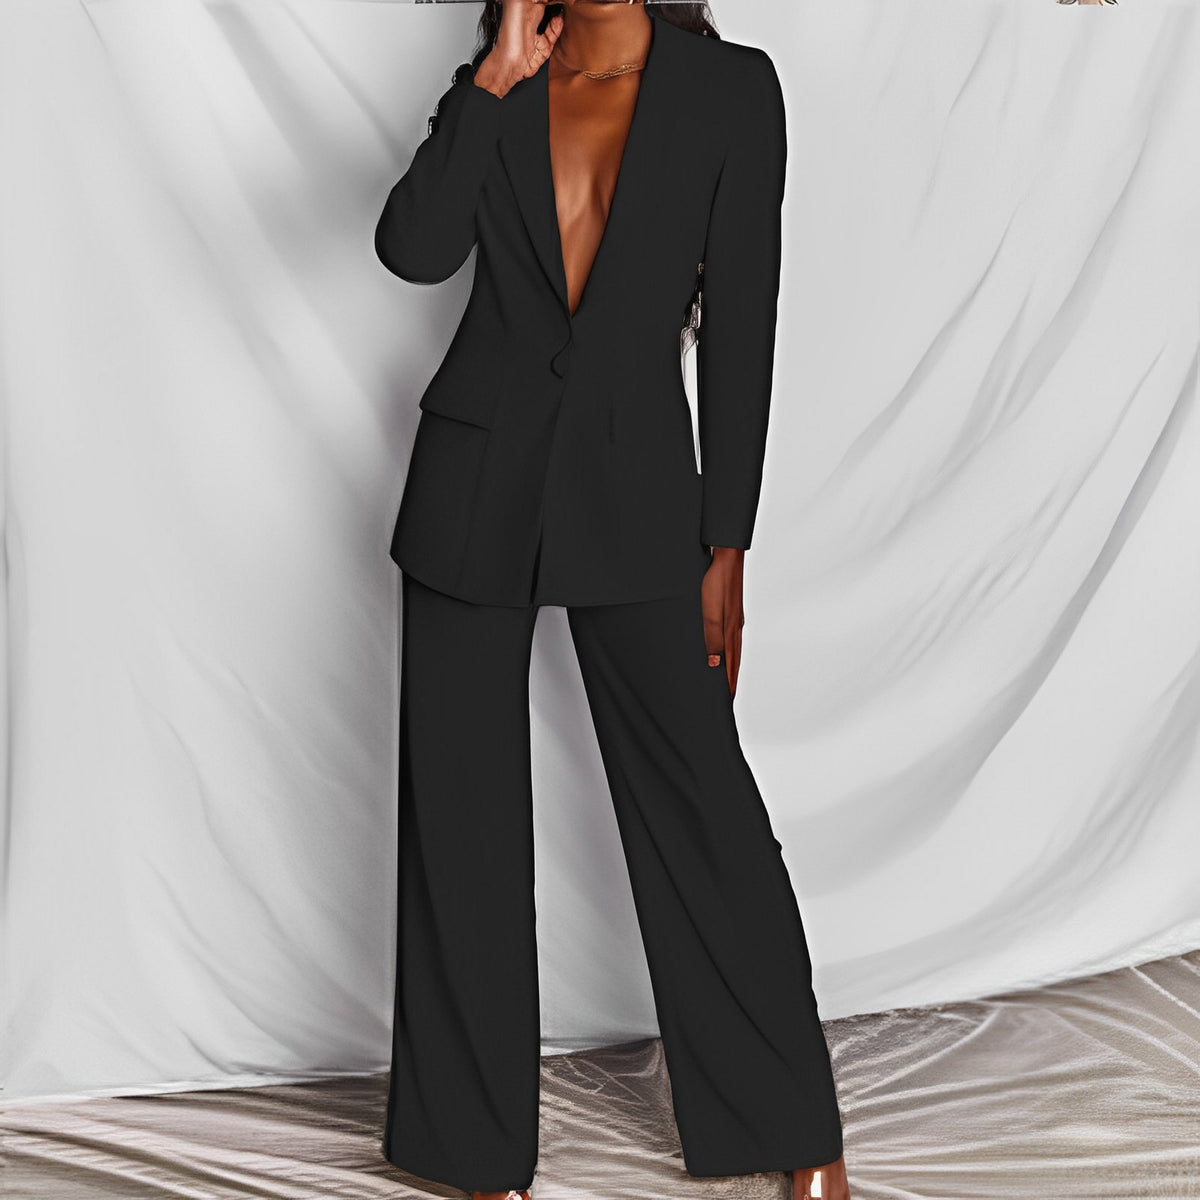 Women's 2-Piece Business Suit with Long Sleeves and Wide Legs in 8 Col